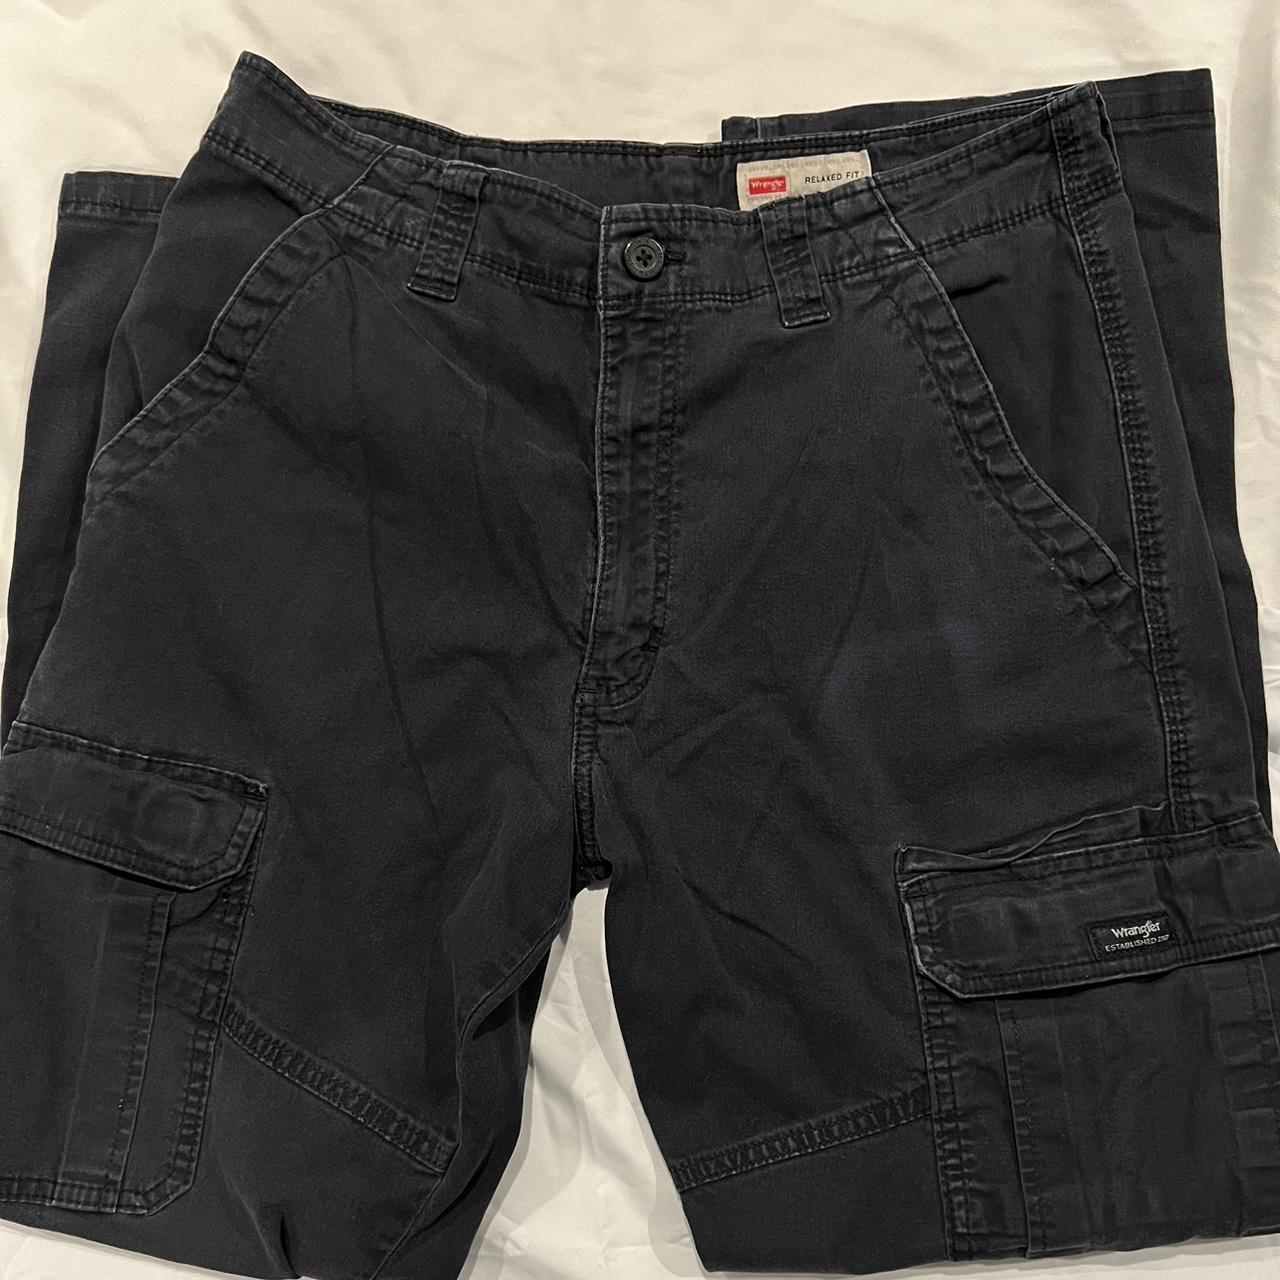 Wrangler relax fit cargos size: 32 X 32 ( can fit a... - Depop